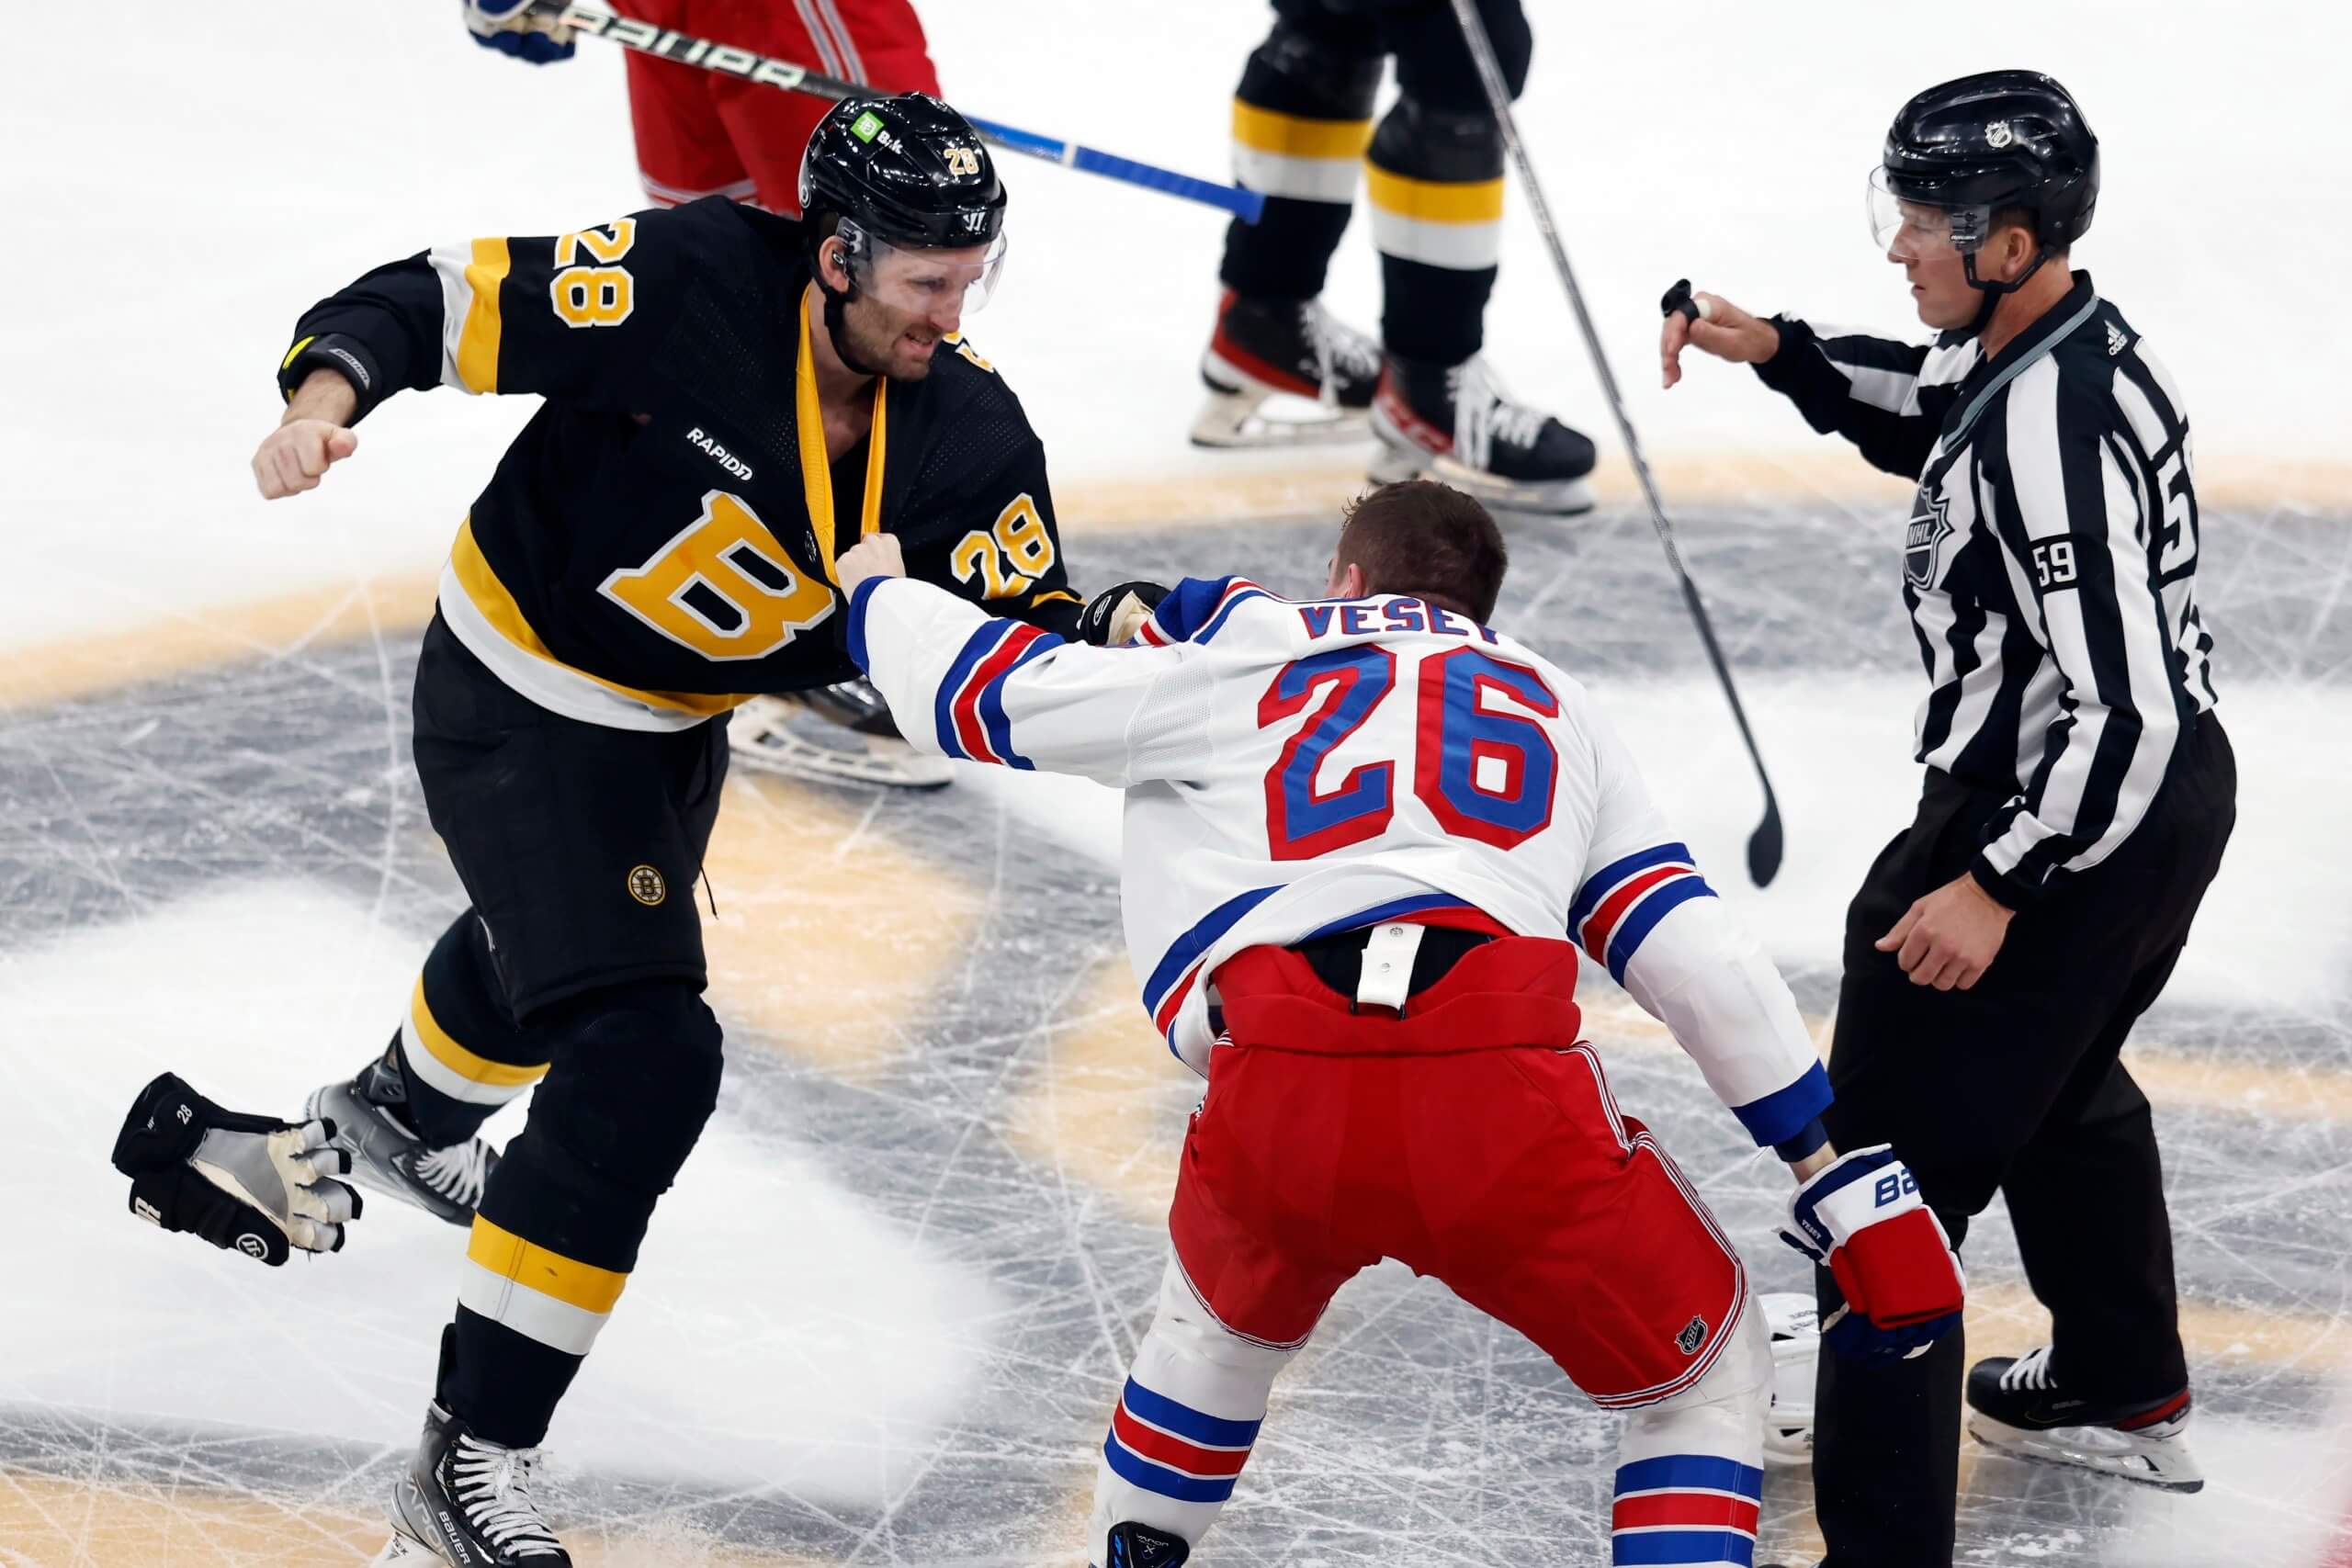 Bruins Fall to Rangers in Overtime in Battle of East's Best